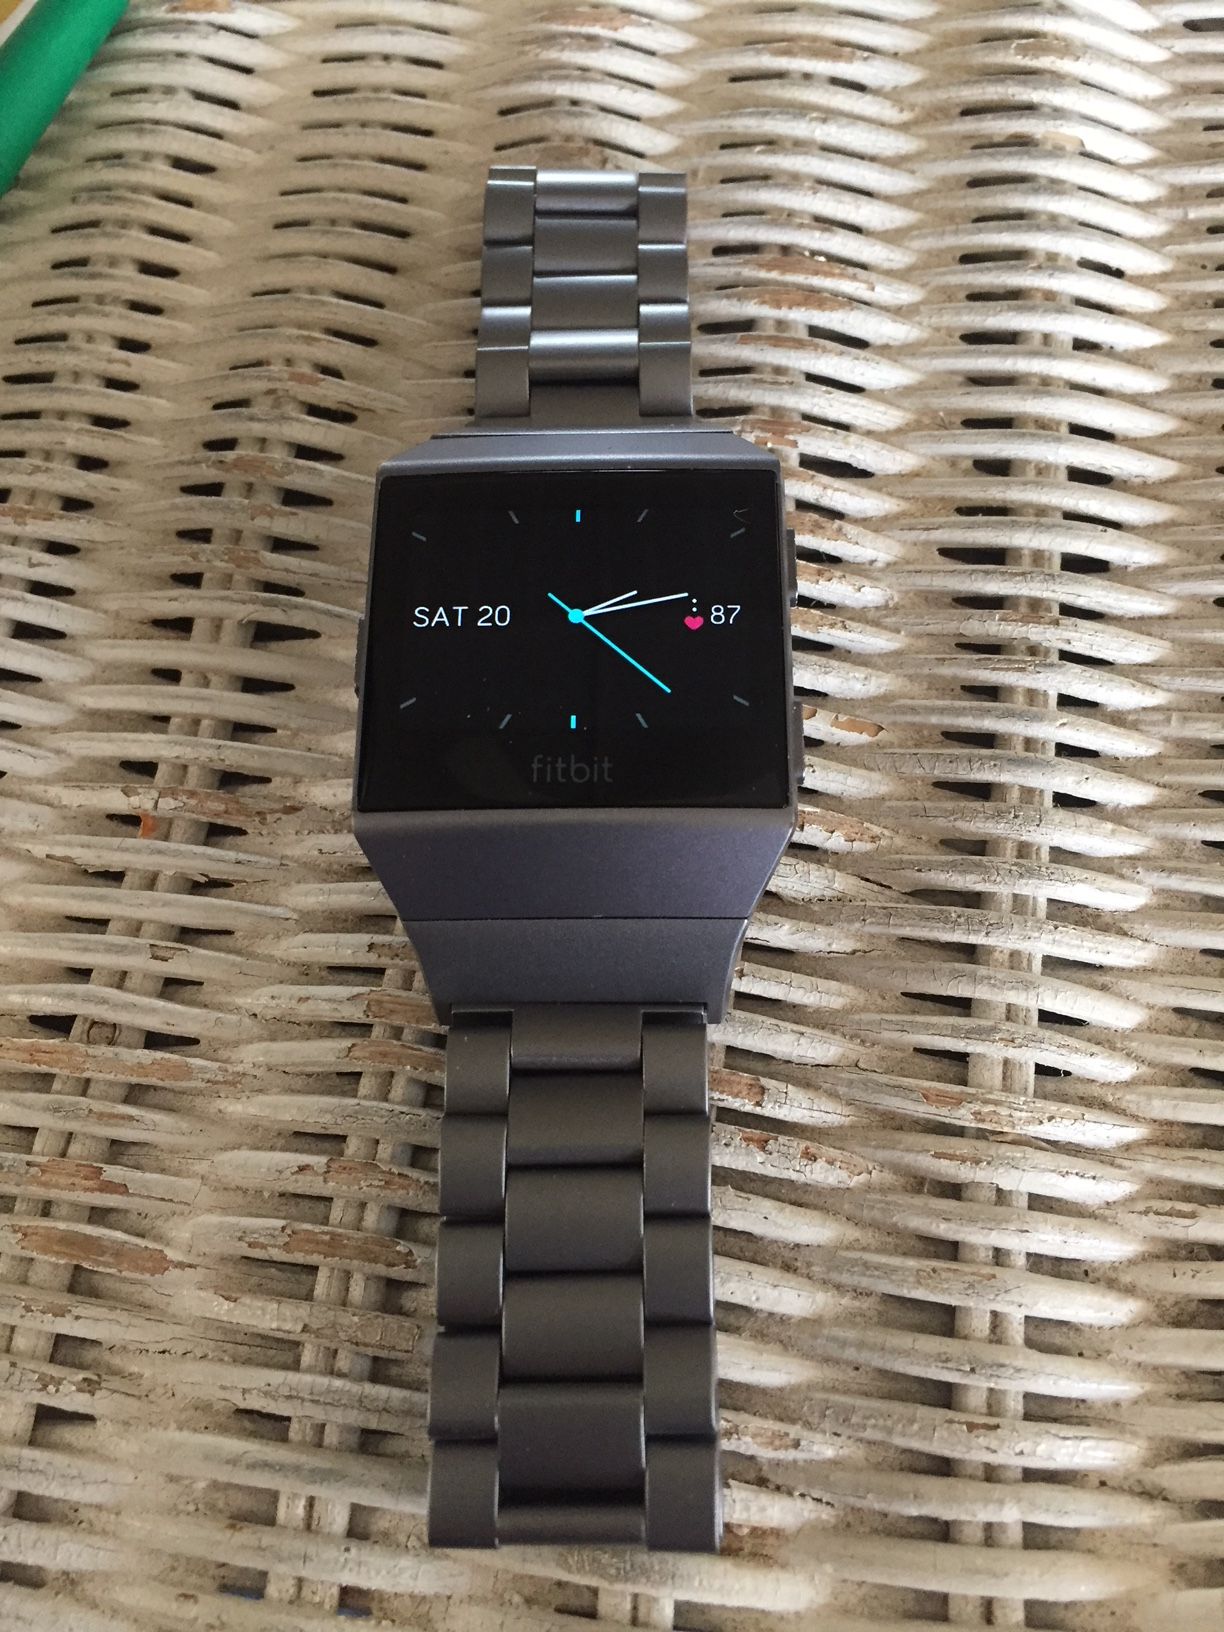 fitbit ionic metal band